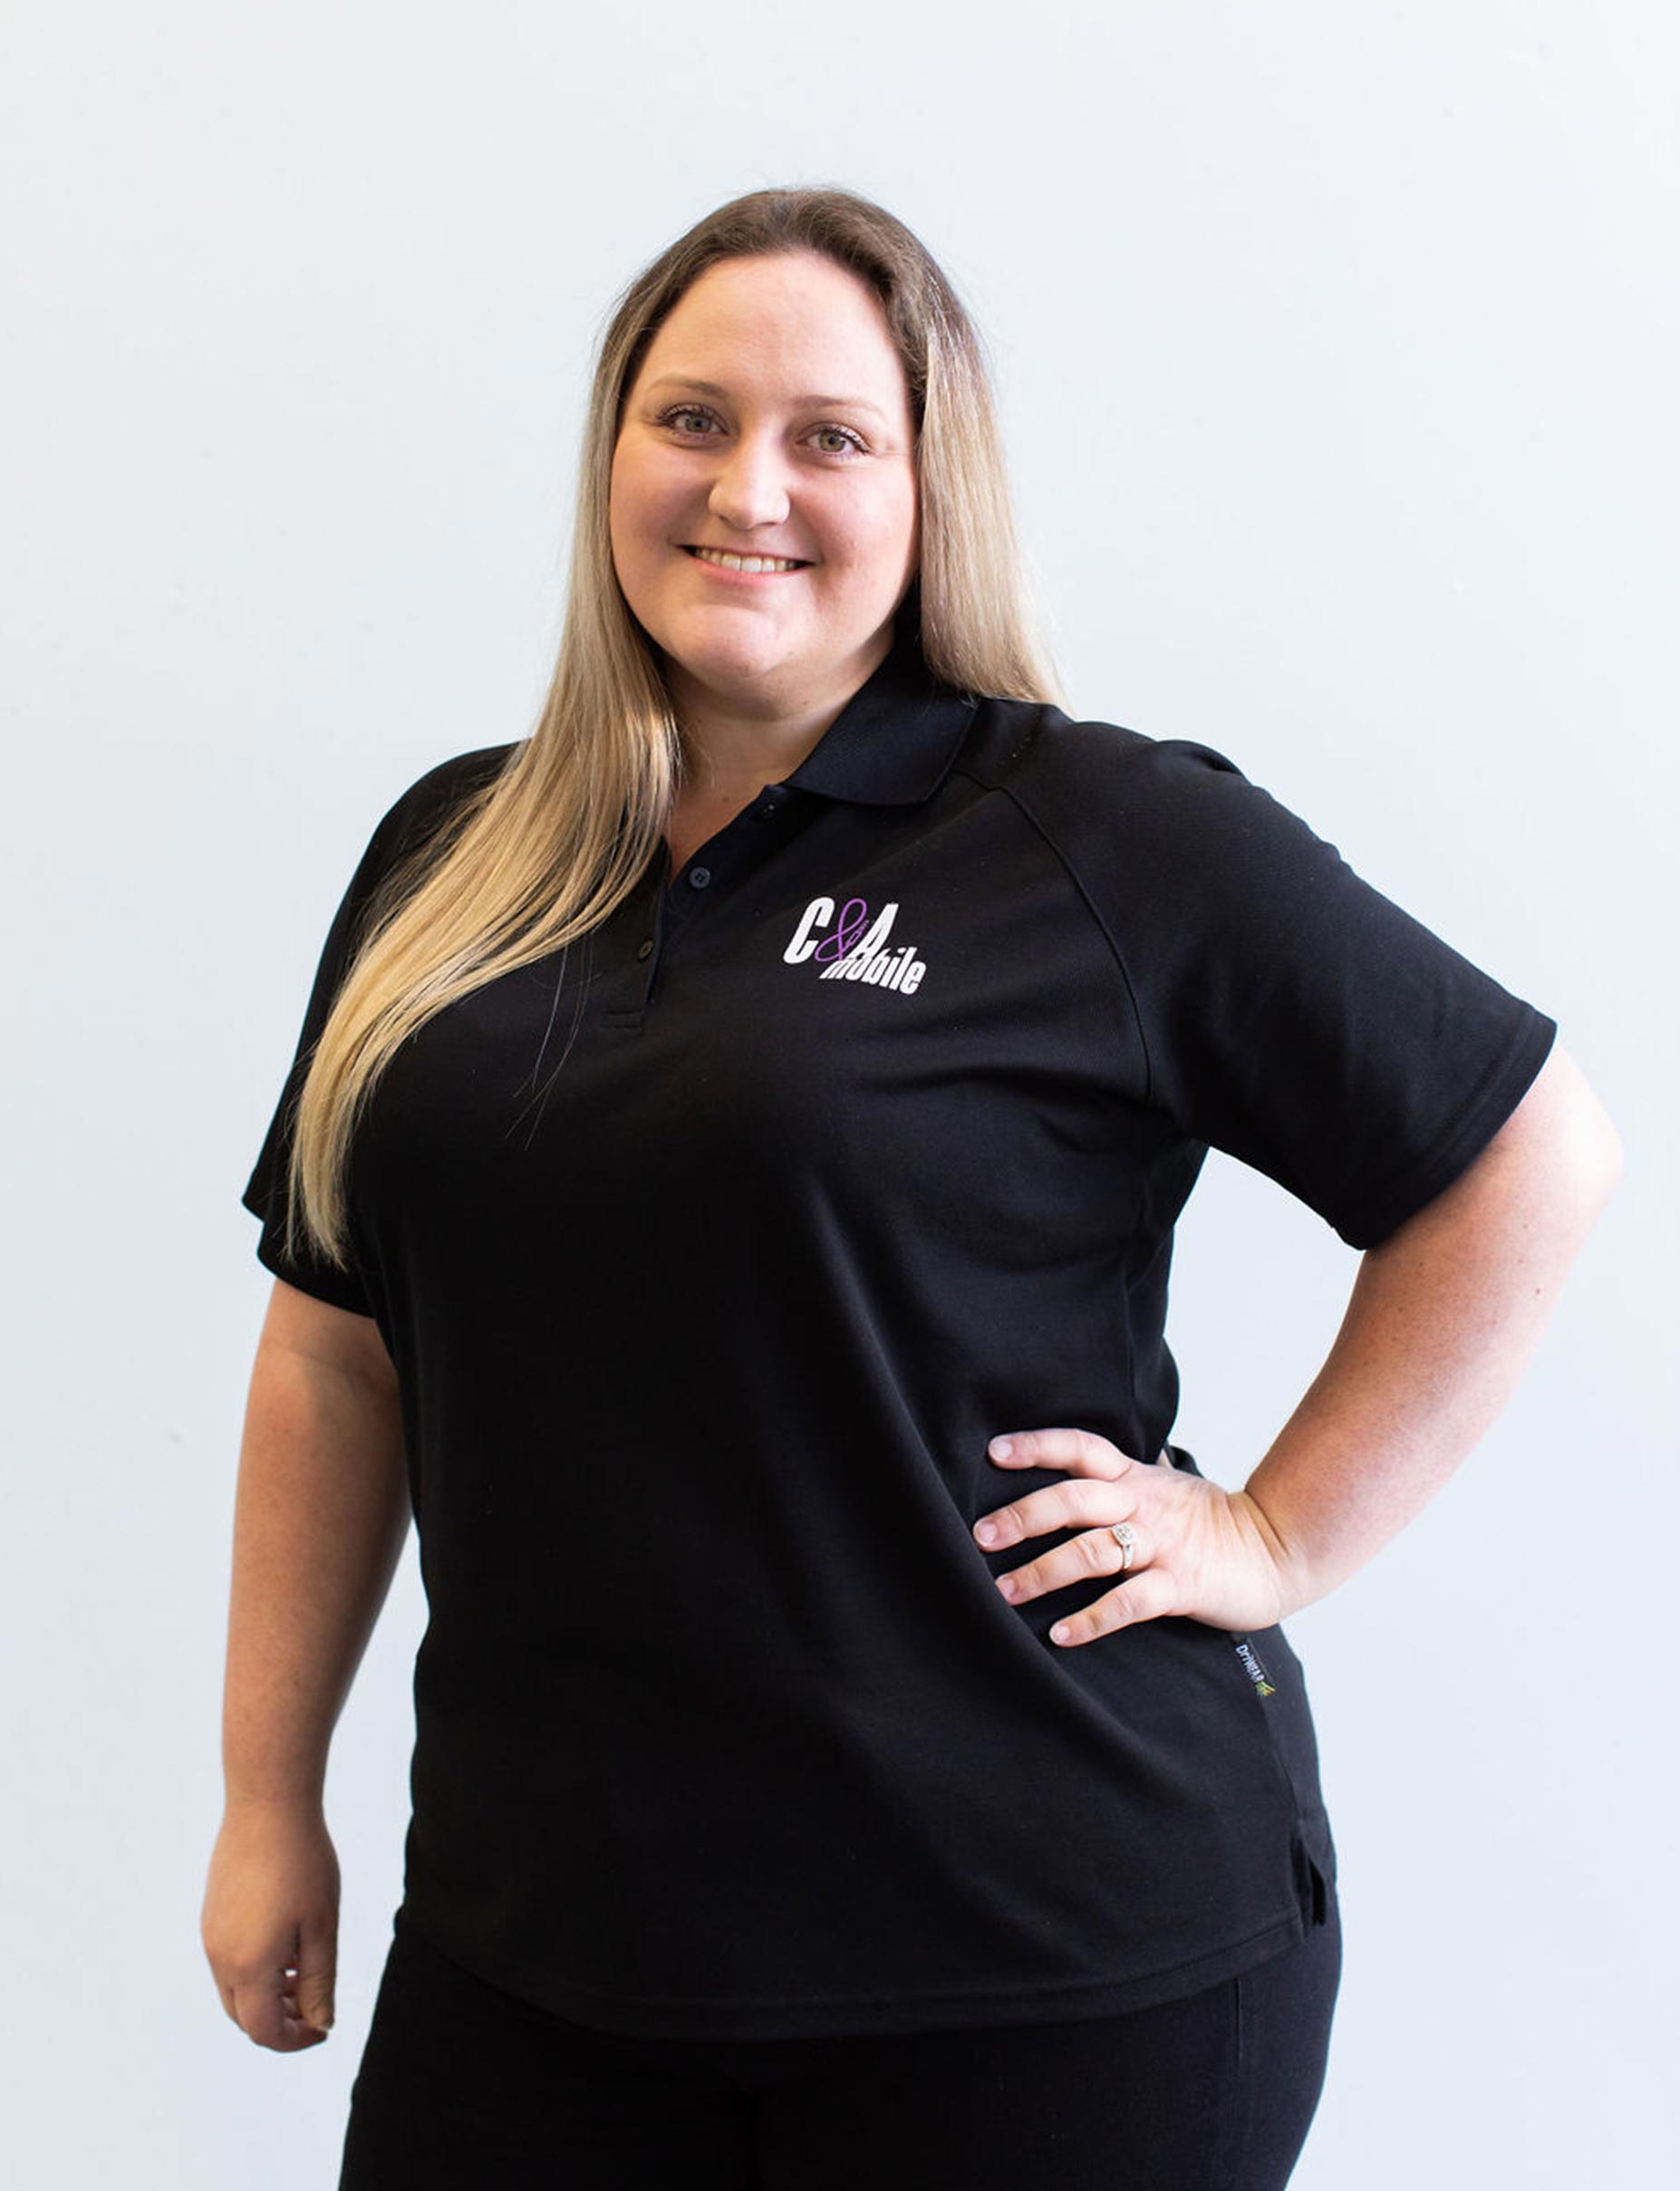 Meet Courtney, our Admin Assistant